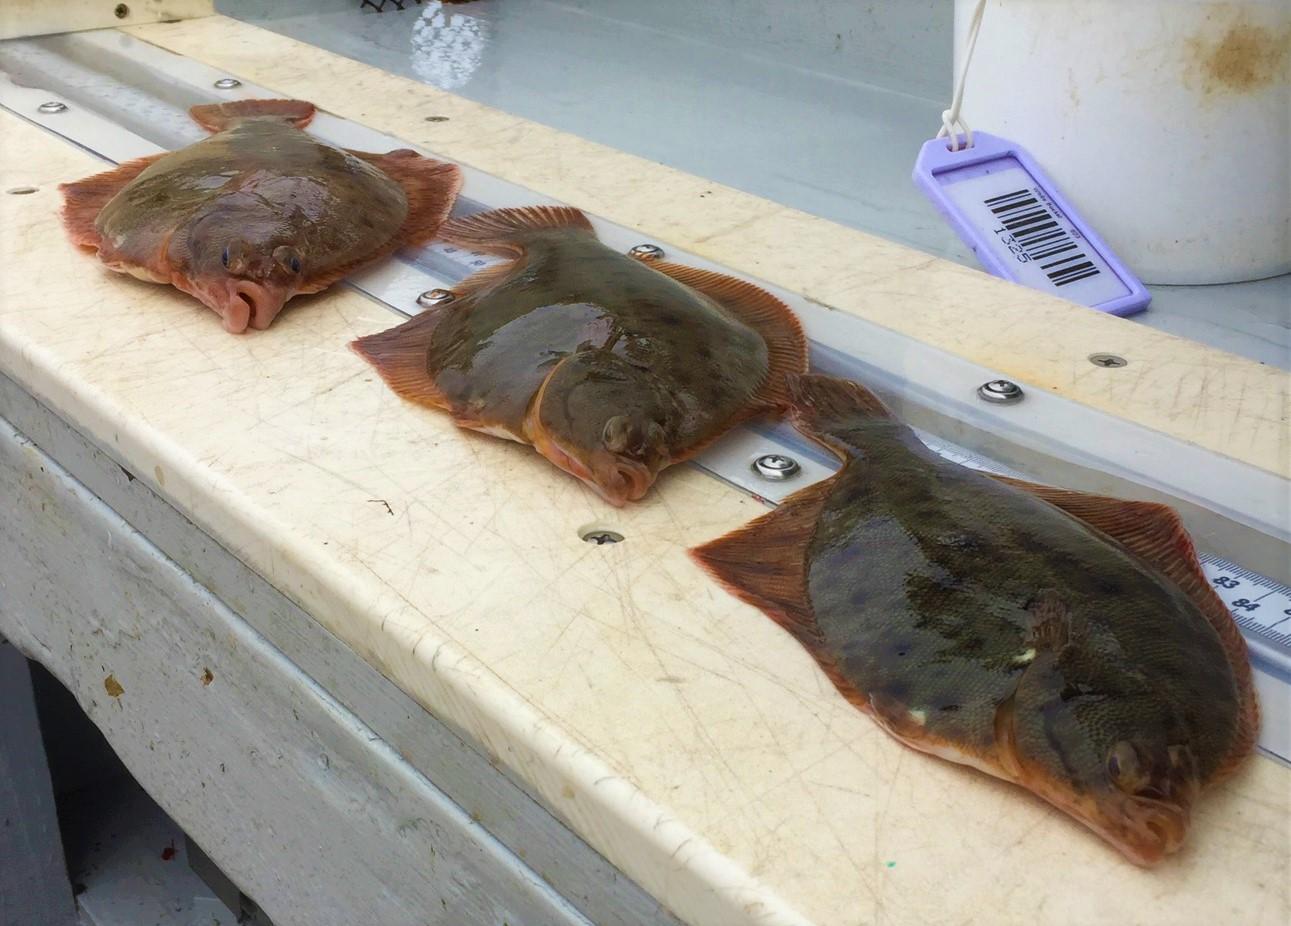 Winter flounder collected during the MA DMF fall 2021 bottom trawl survey.